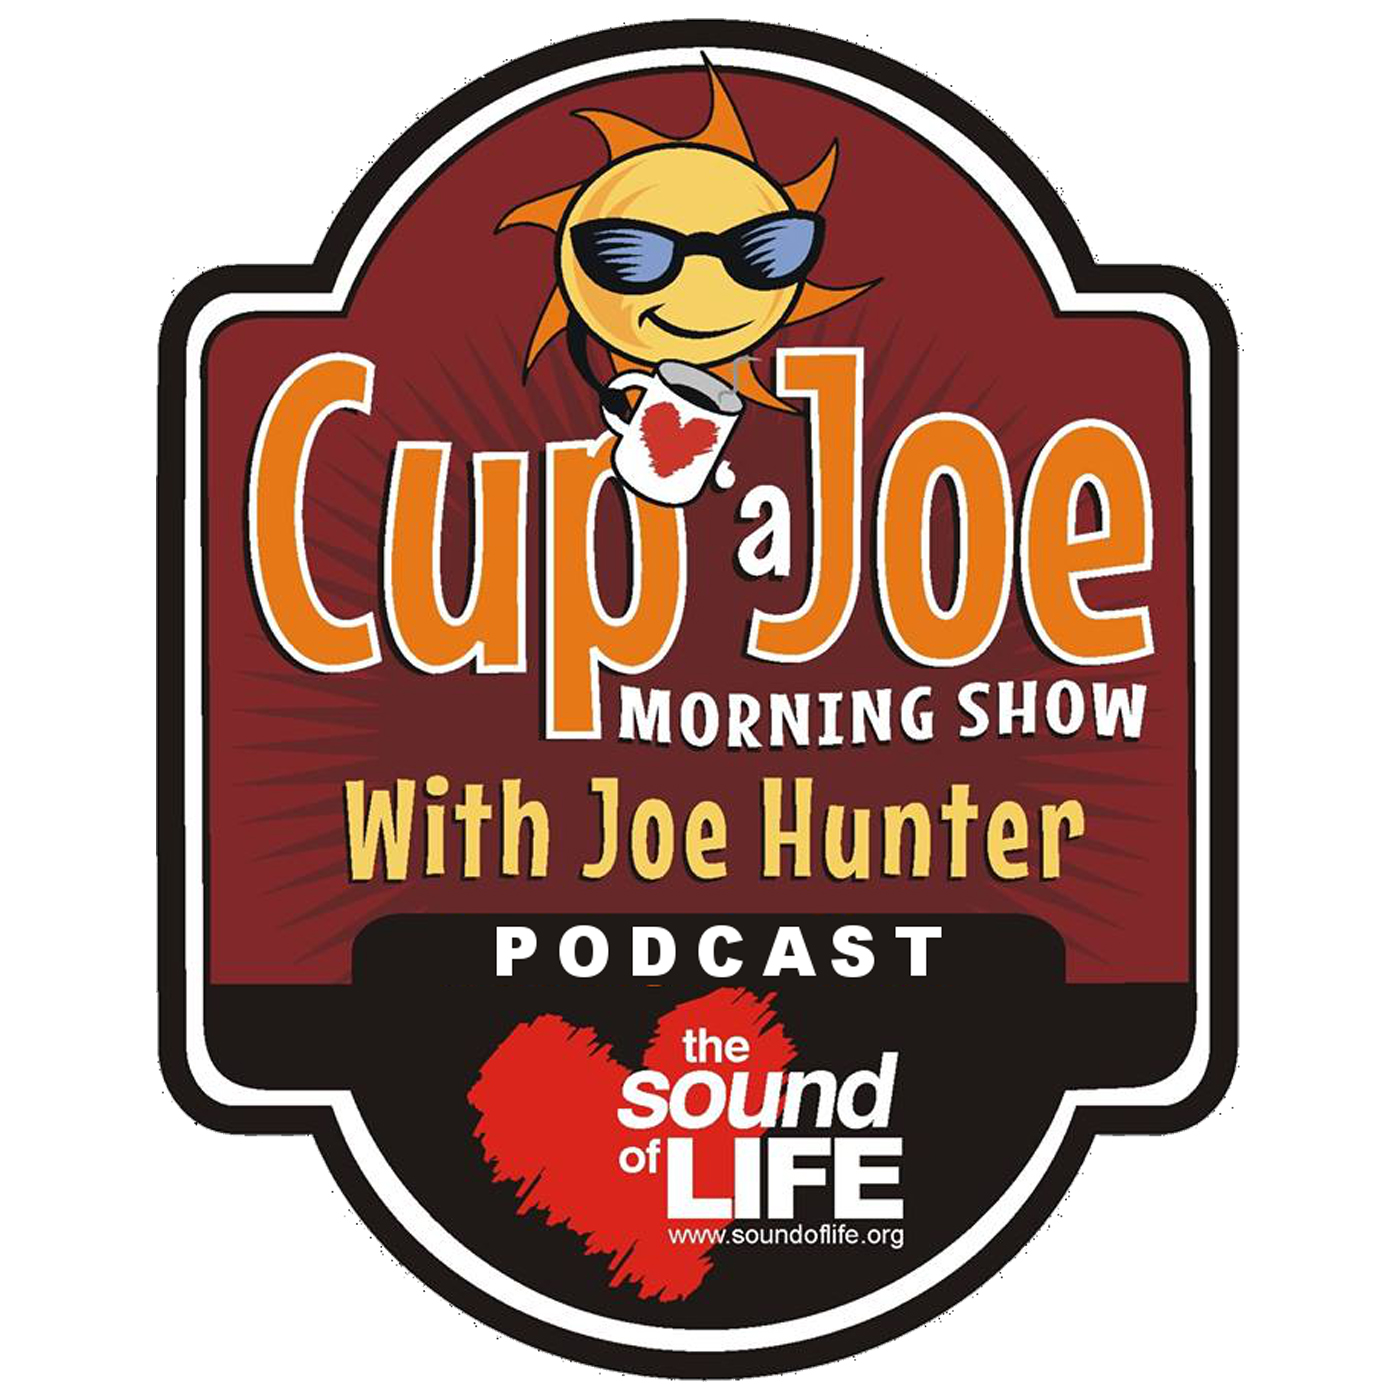 Cup 'a Joe Morning Show Podcast